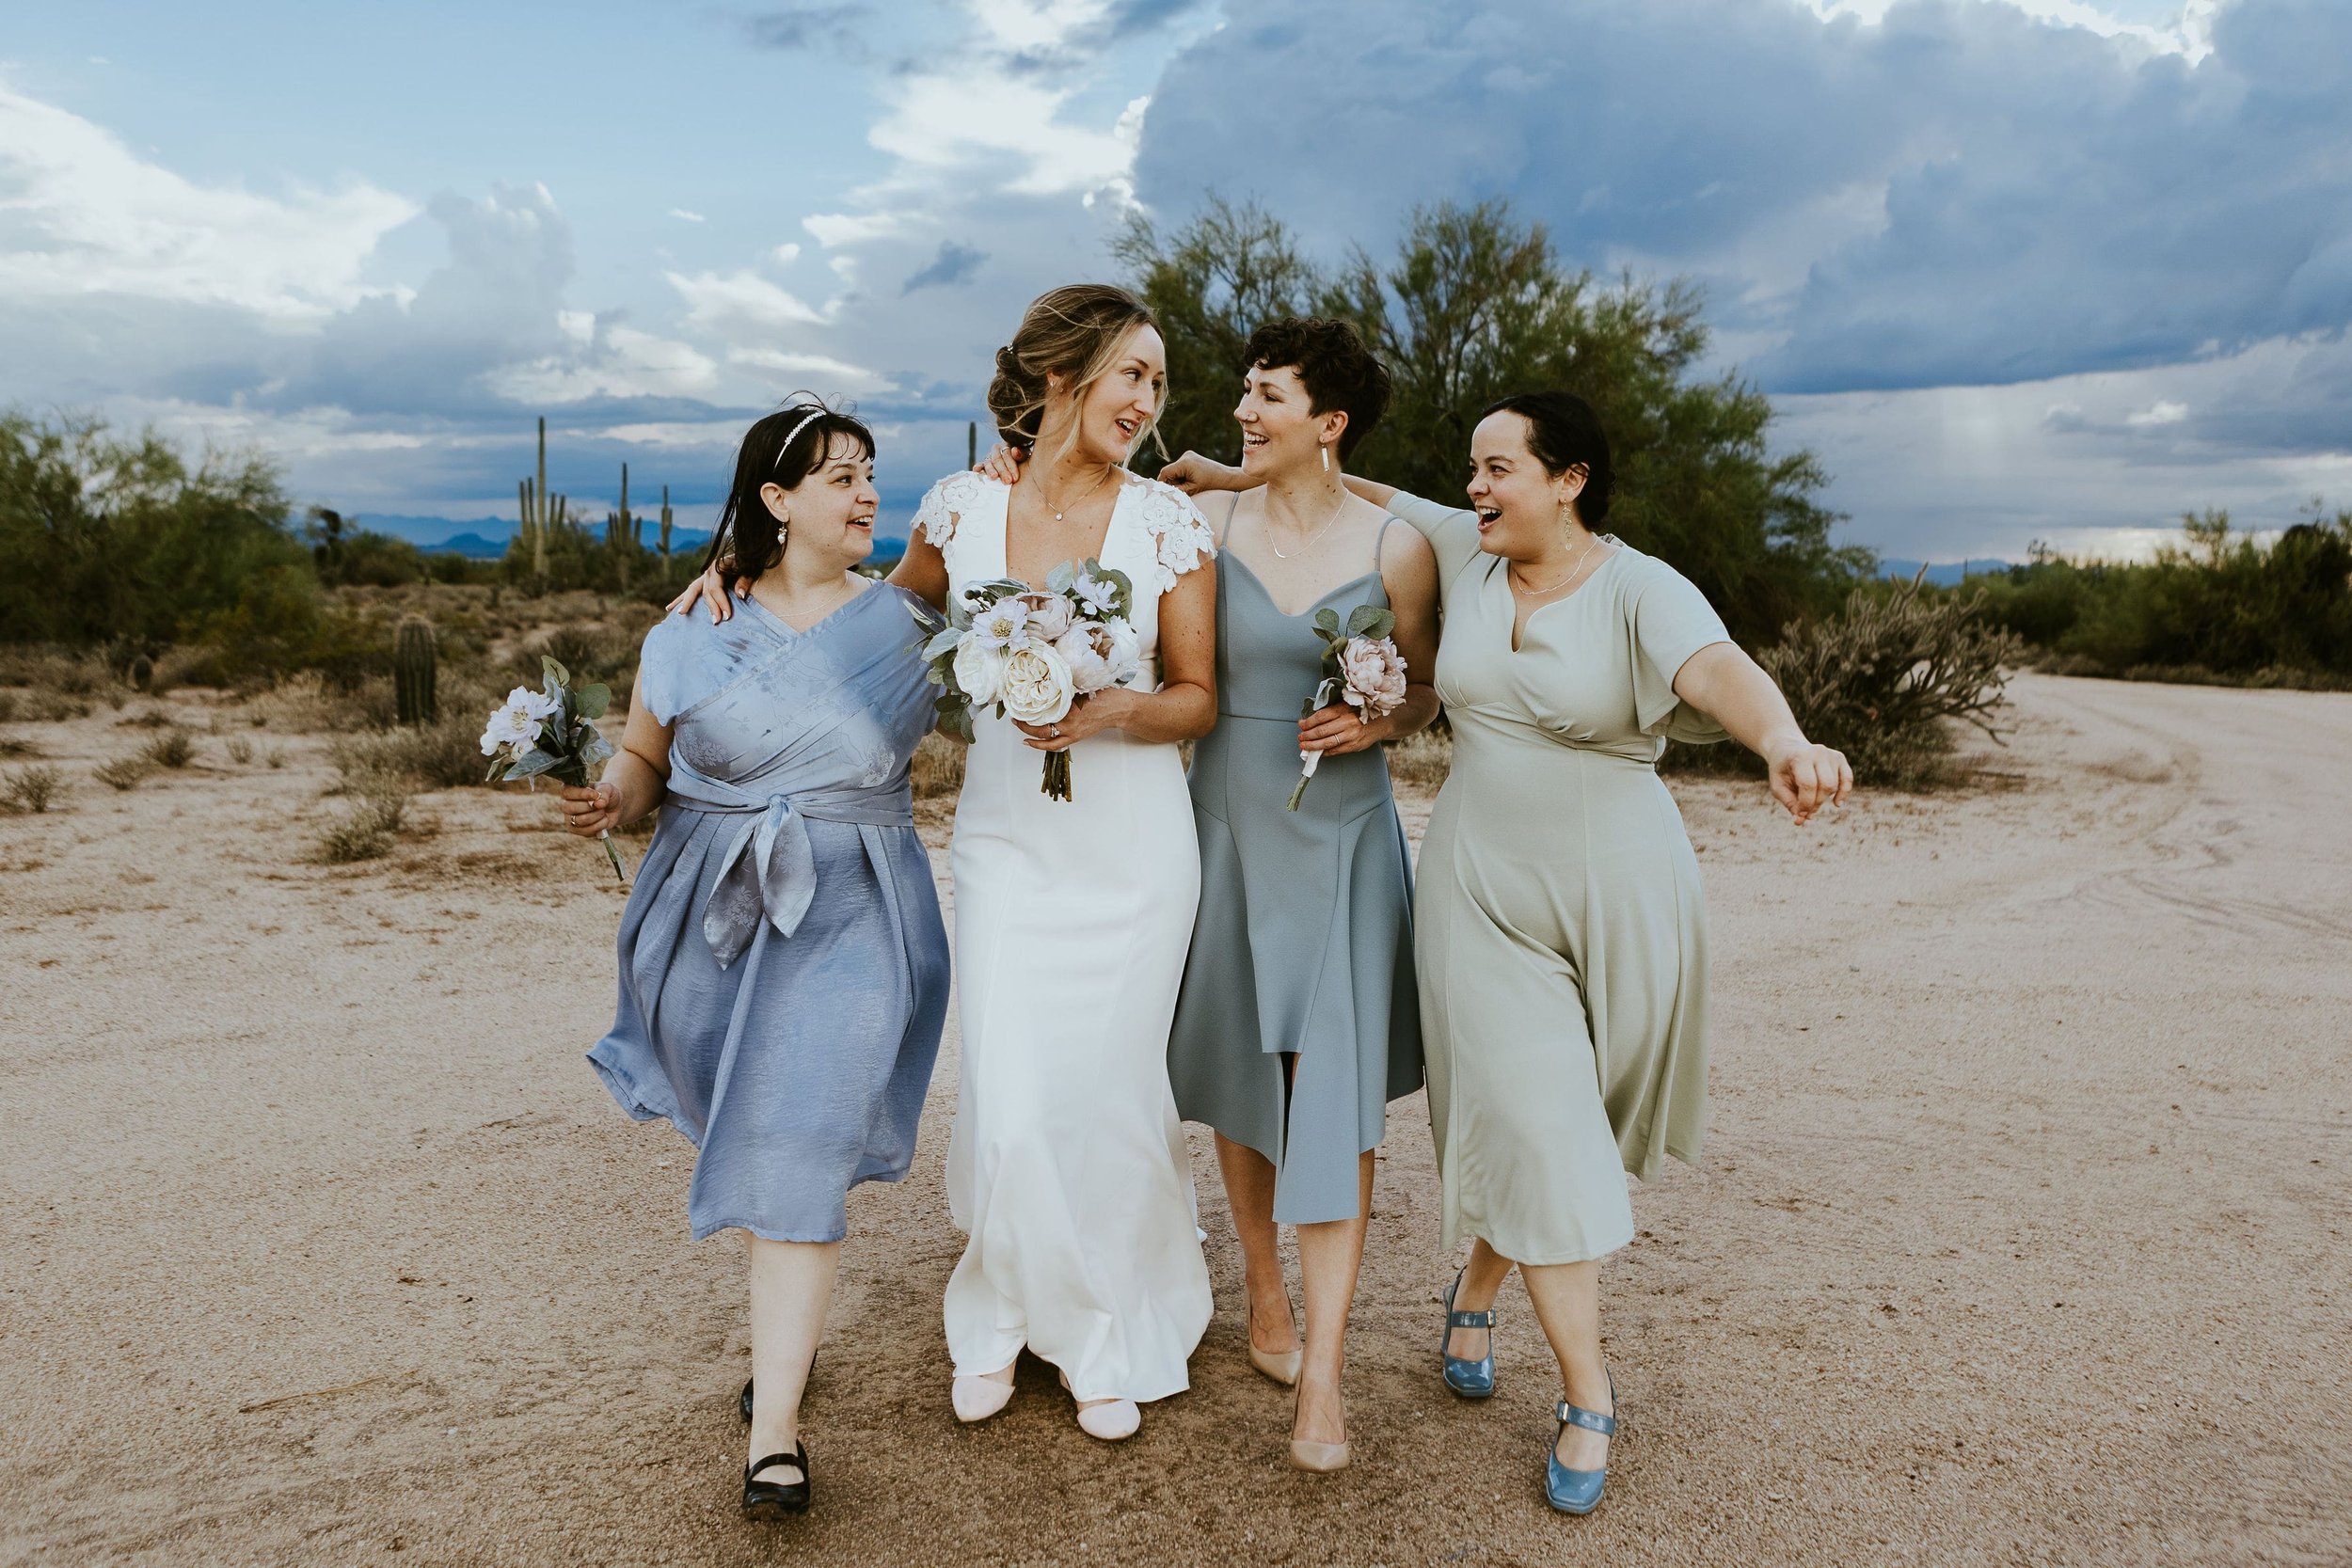 Bride walks arm in arm with bridal party at desert foothills wedding in Arizona